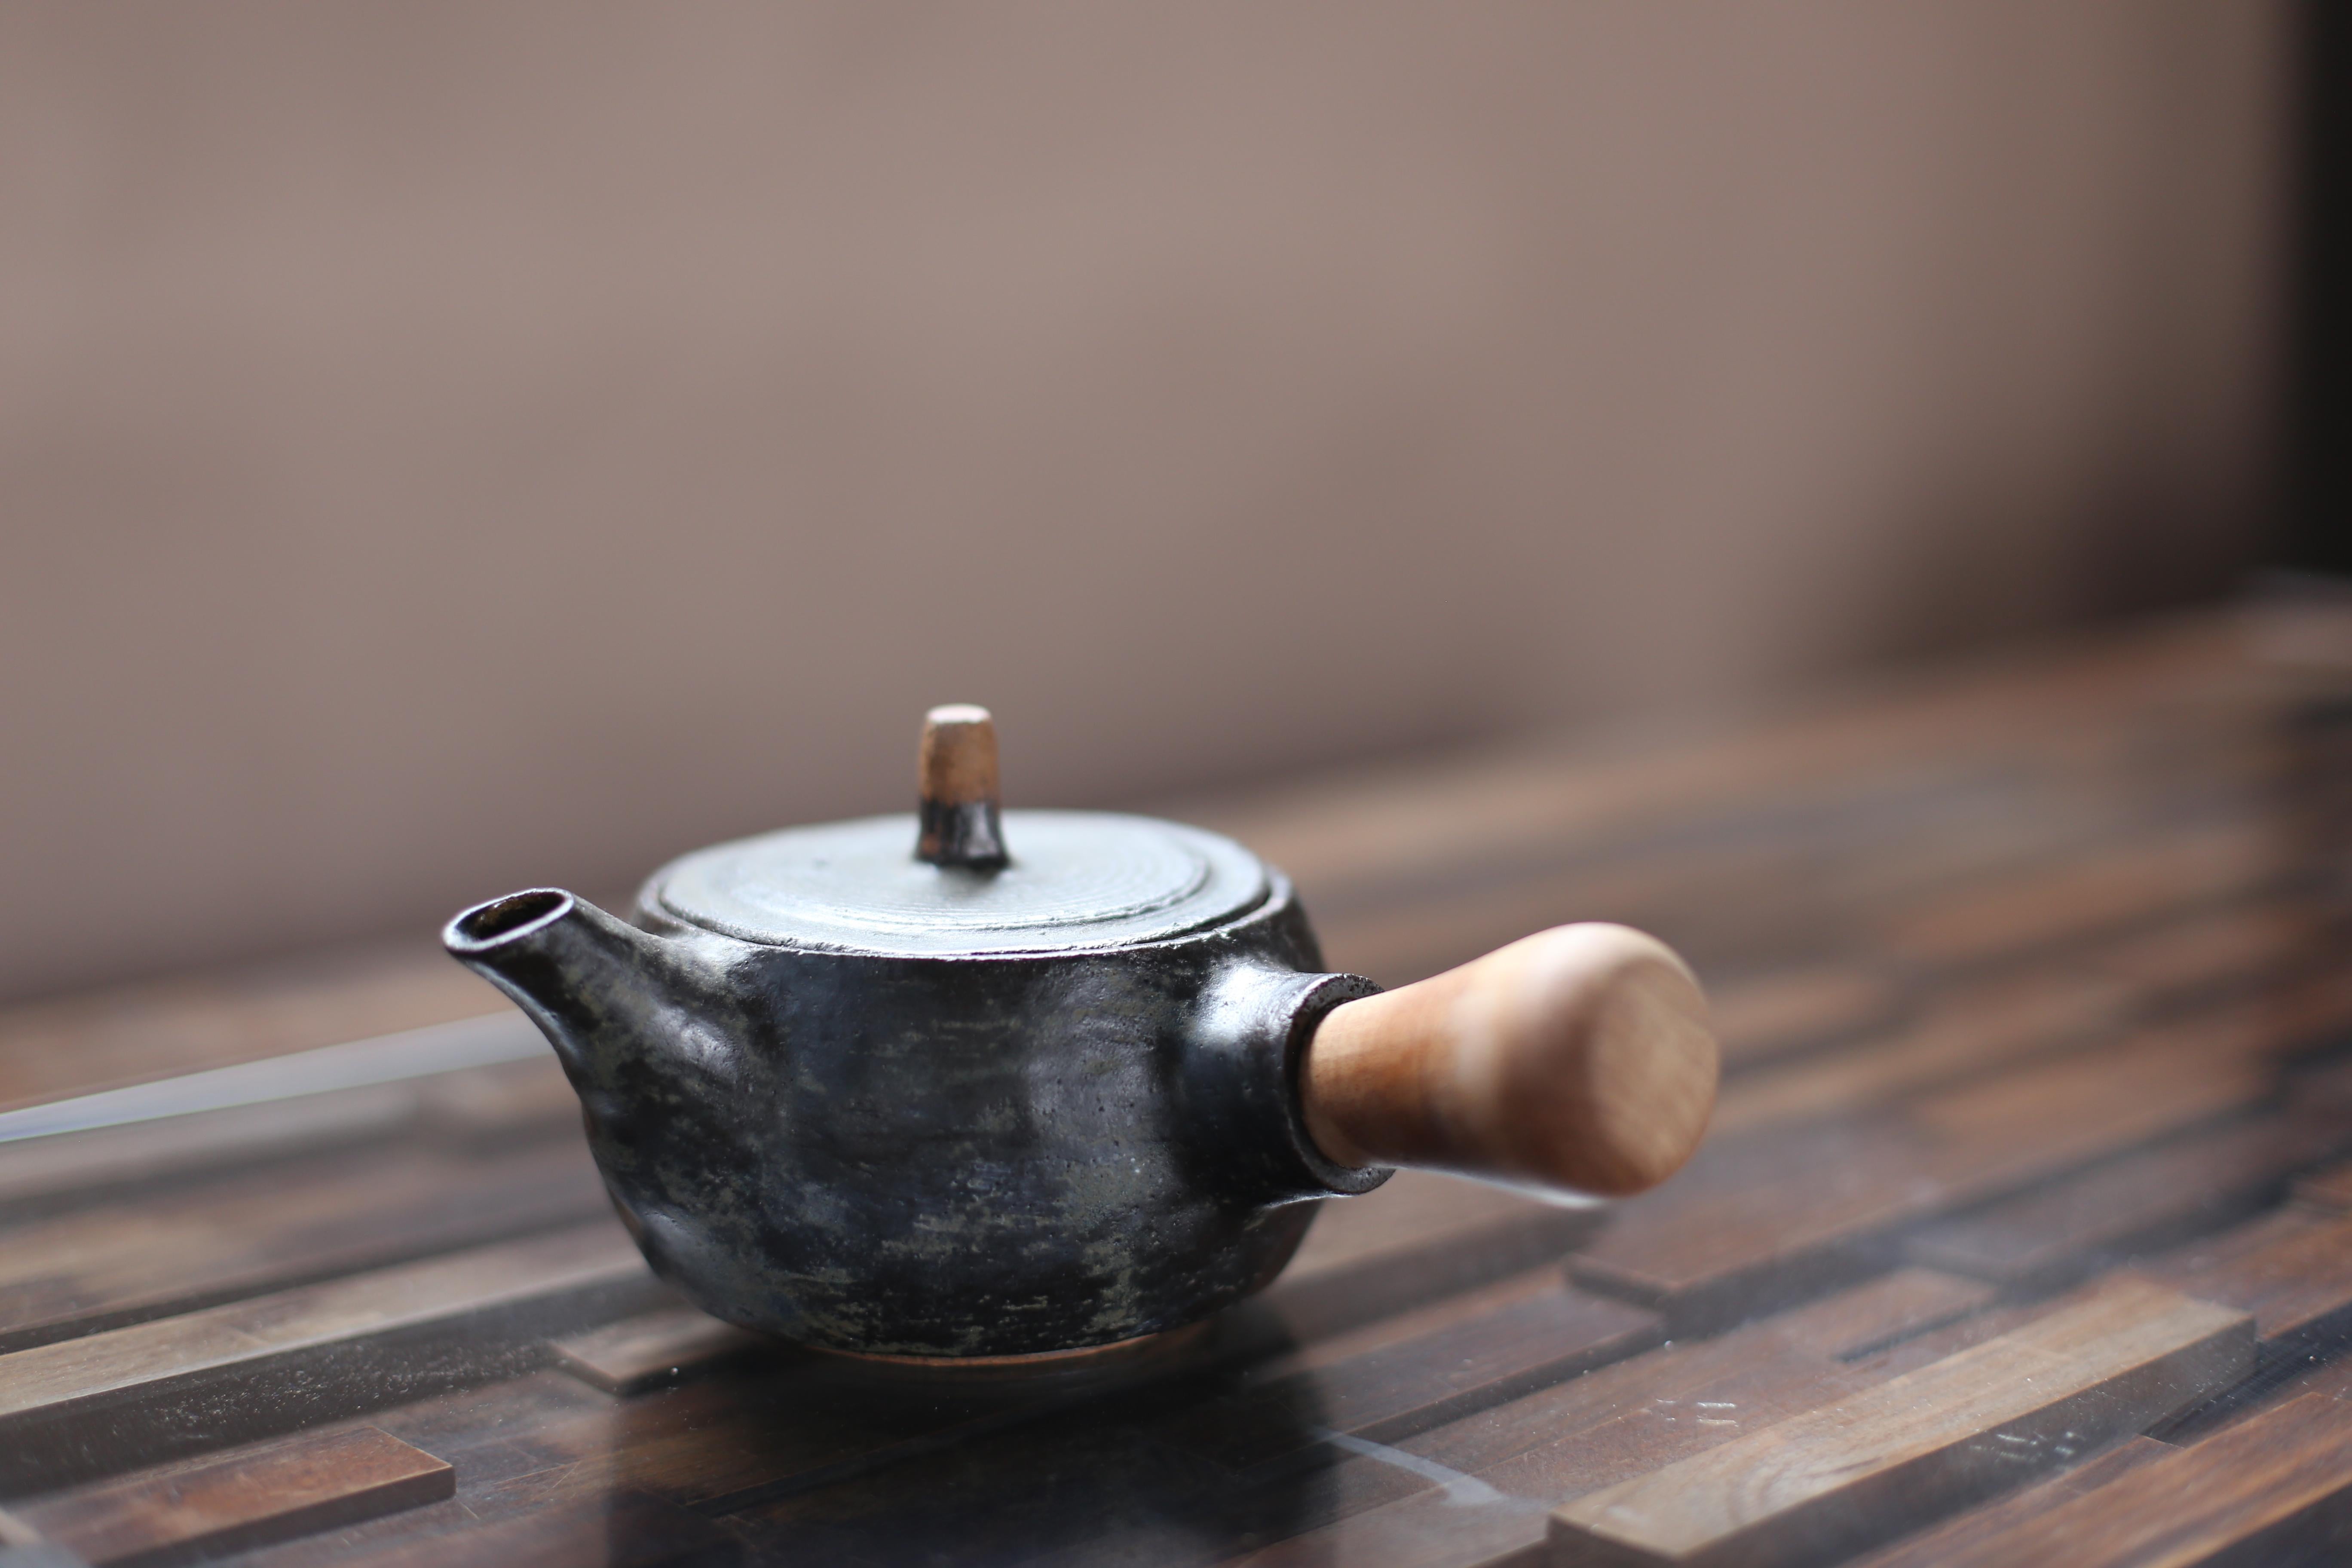 Hand-Crafted Wheel Thrown Tea Pot with Wooden Handle